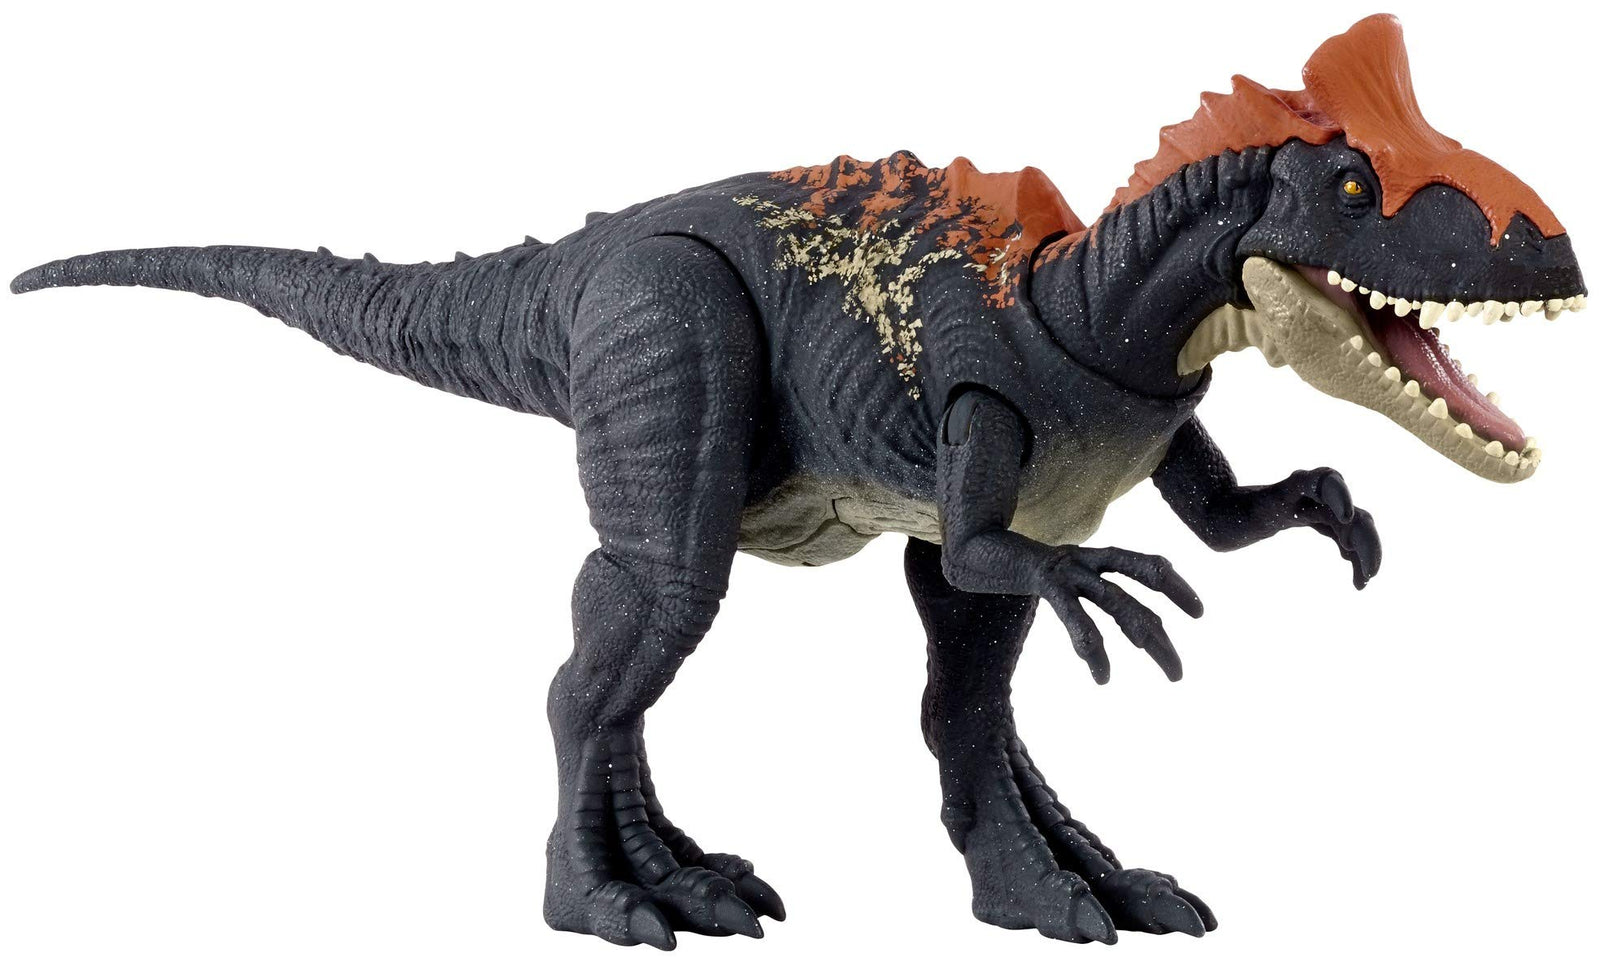 Jurassic World Camp Cretaceous Sound Strike Cryolophosaurus Medium-size Dinosaur Figure, Strike Action, Sounds, Movable Joints, Ages 4 Years Old & Up